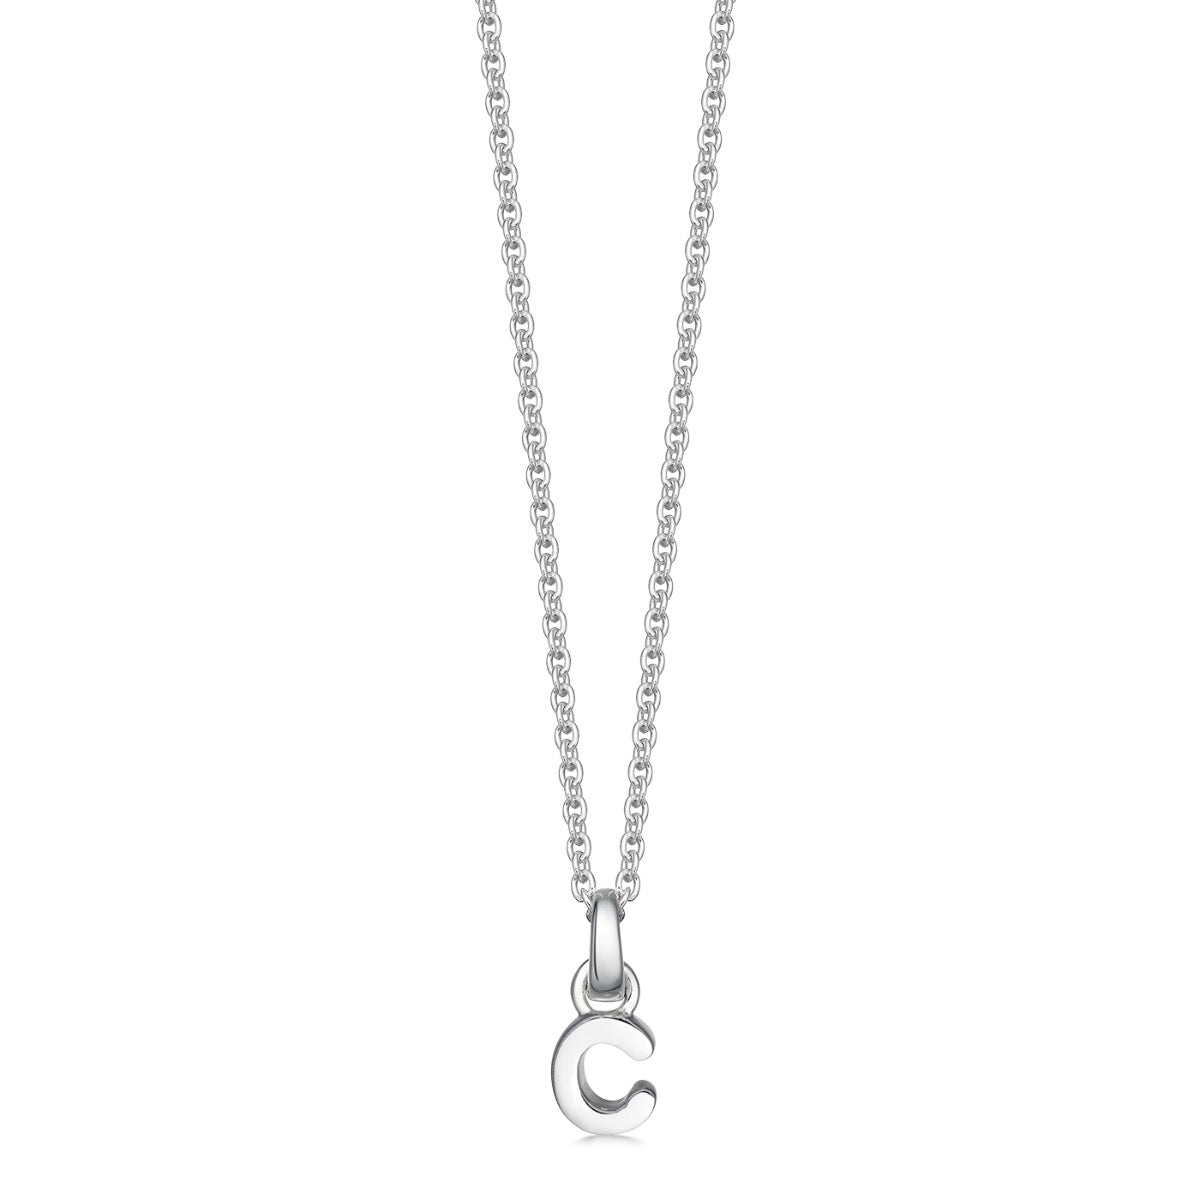 Mini Silver Letter "C" Initial Necklace